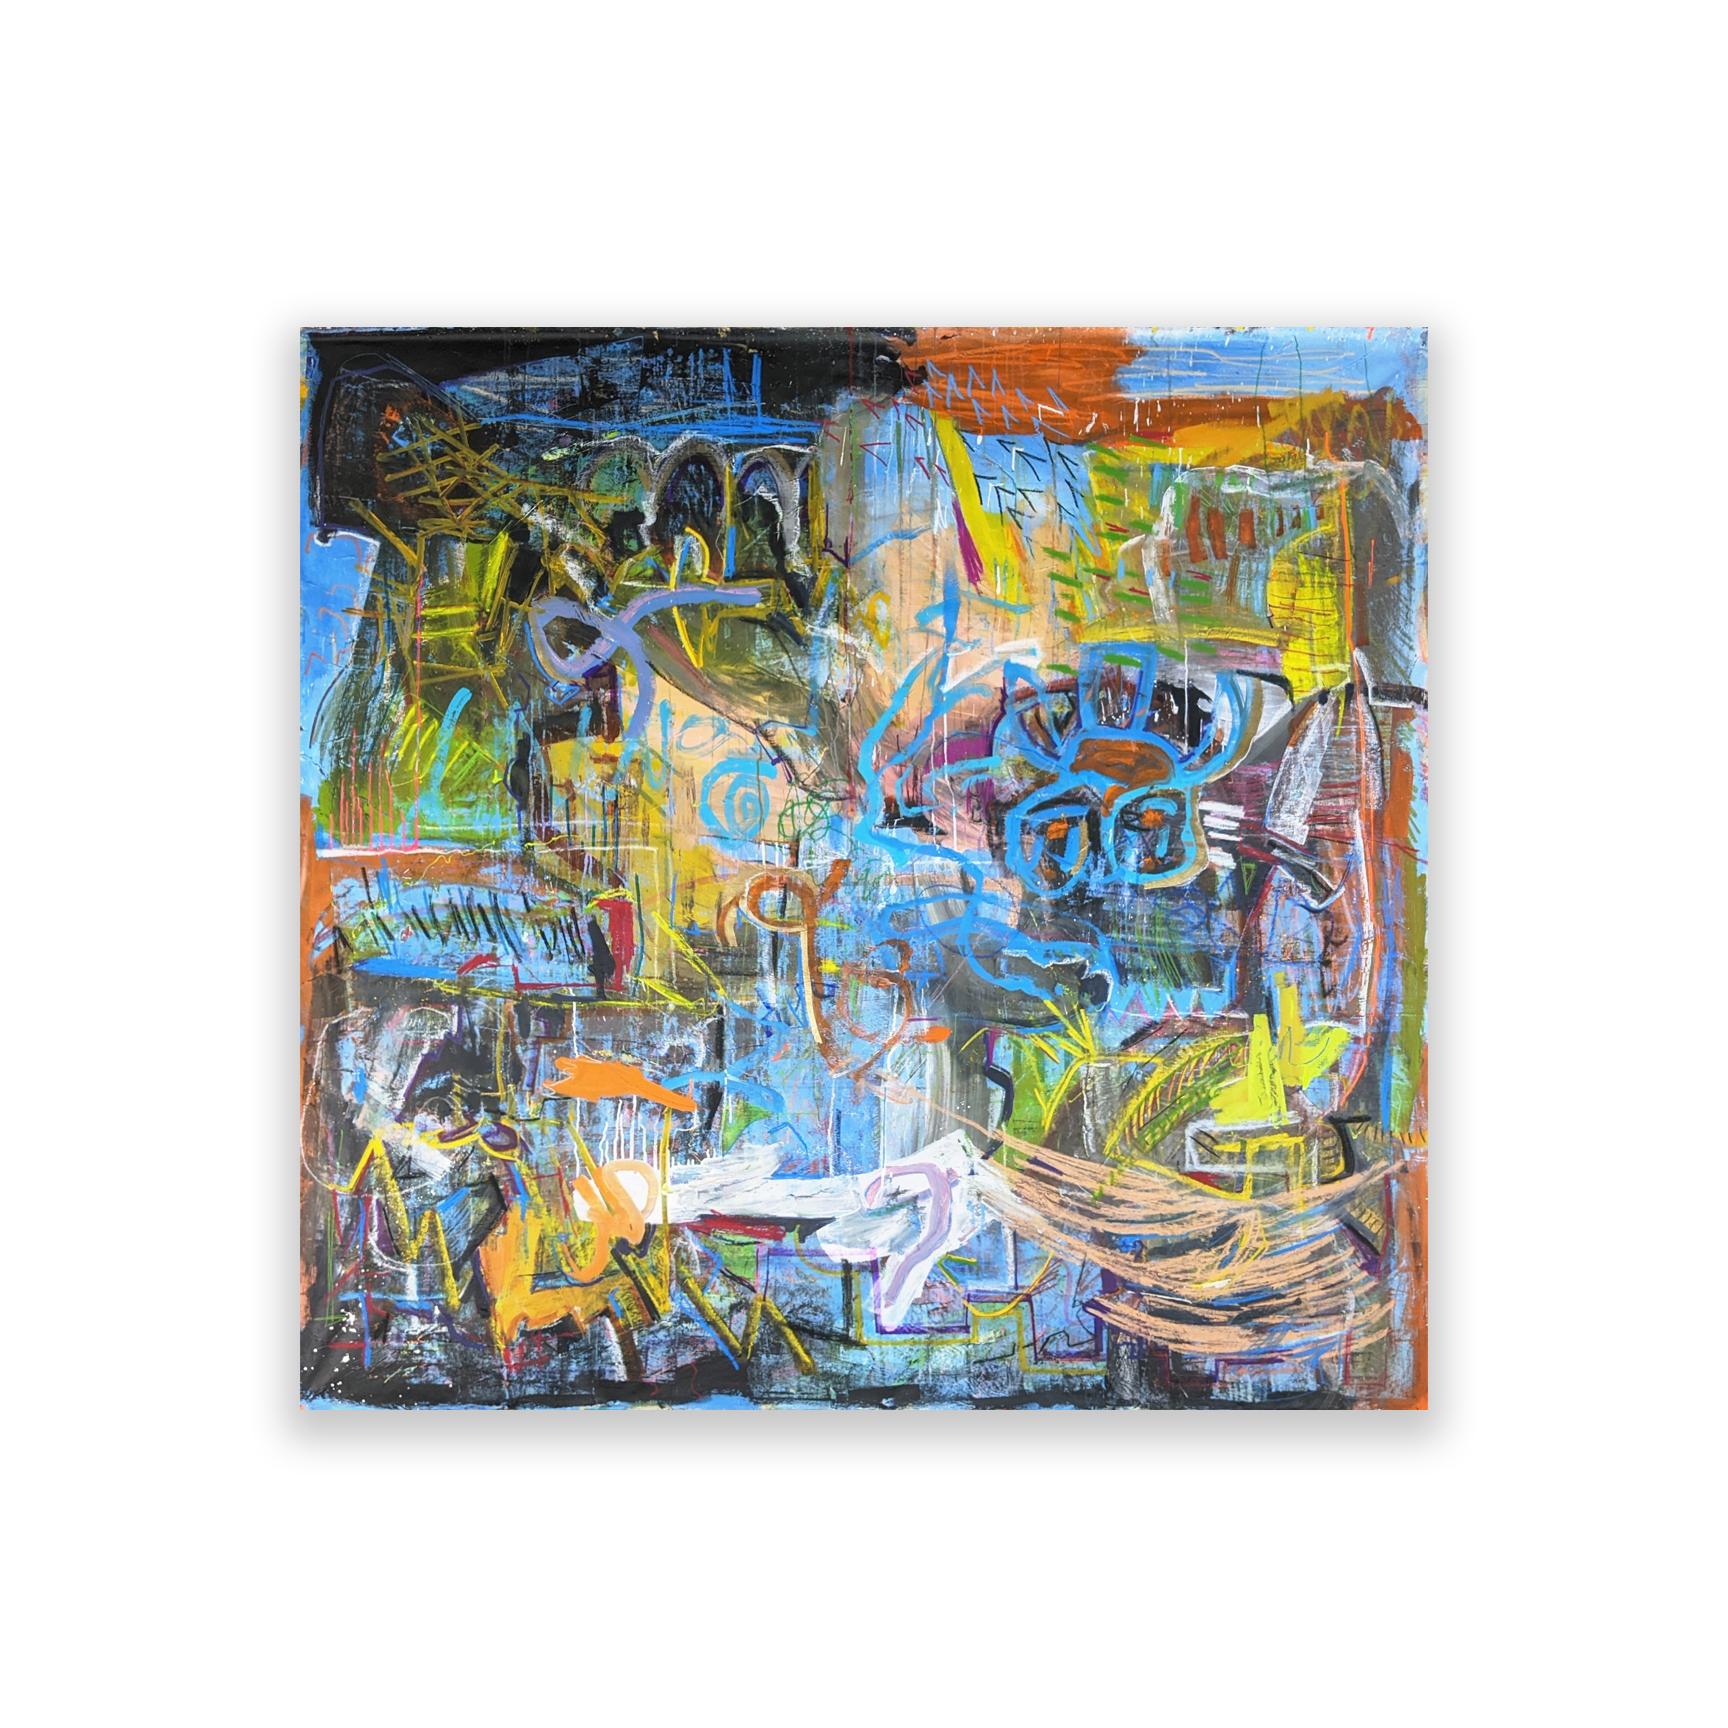 Curroon by Joseph Conrad-Ferm, 2022
Mixed Media 
88 × 92 in
223.52 × 233.7 cm

Mixed media abstract painting on canvas by NY-based artist Joseph Conrad-Ferm. 

Shipping is not included. See our shipping policies. Please contact us for shipping